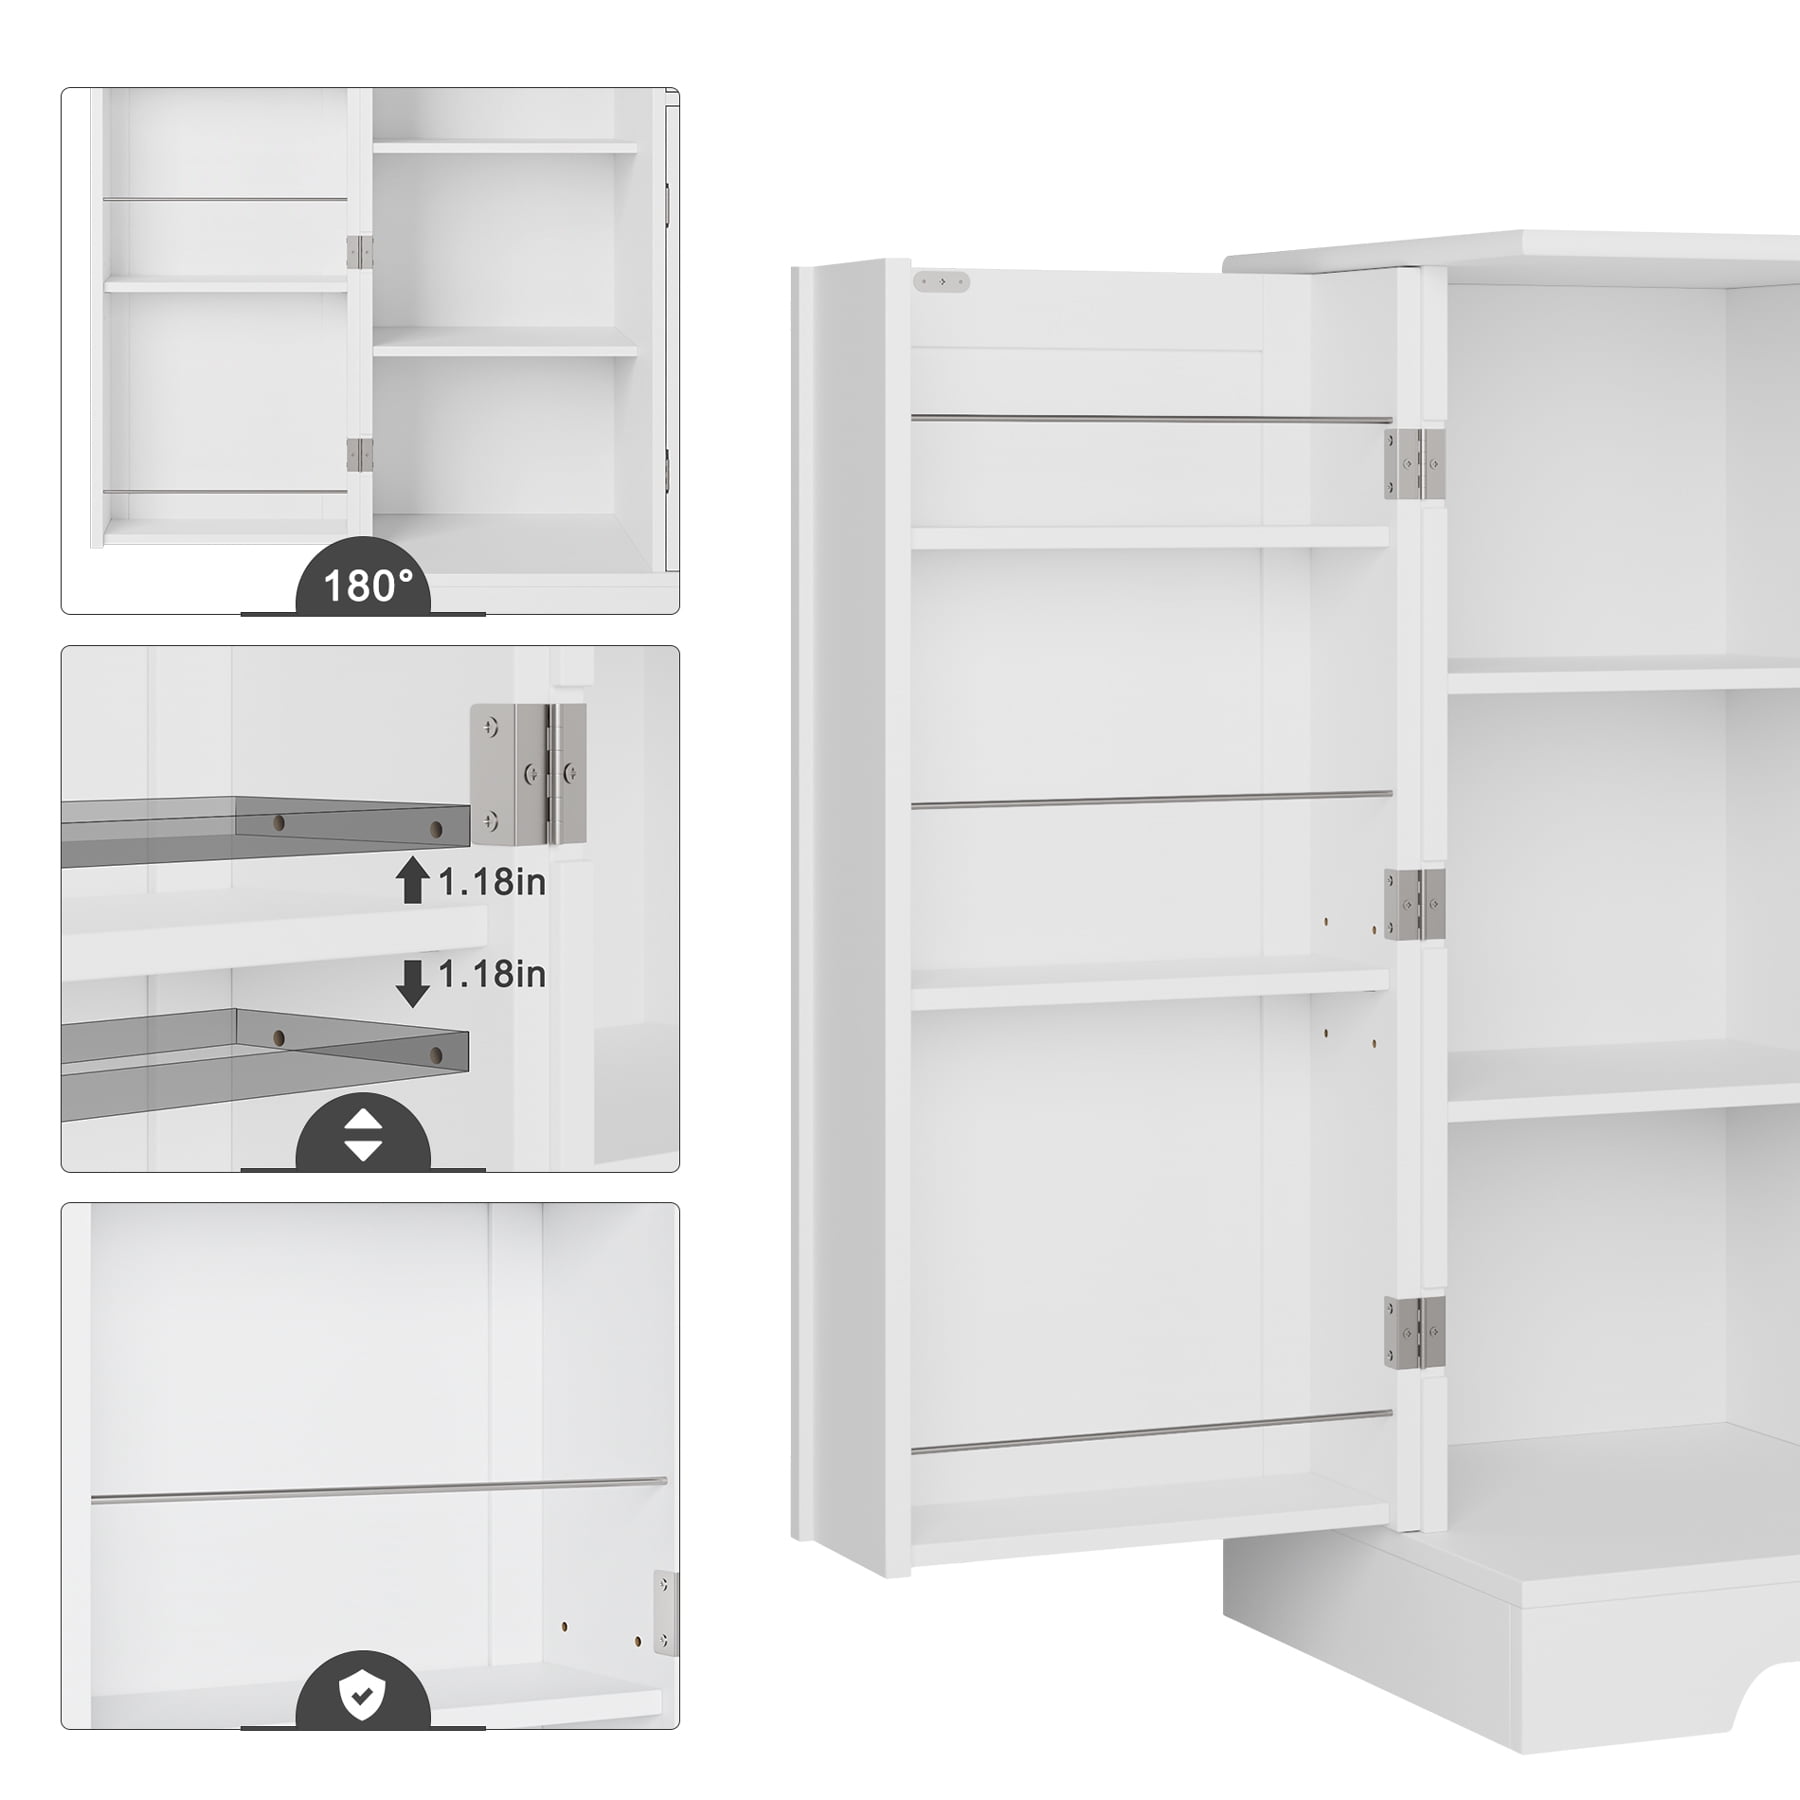 HOMEFORT 41 Kitchen Pantry, Farmhouse Pantry Cabinet, Storage Cabinet with  Doors and Adjustable Shelves 41 H x 23.2 W x 12 D (White) 